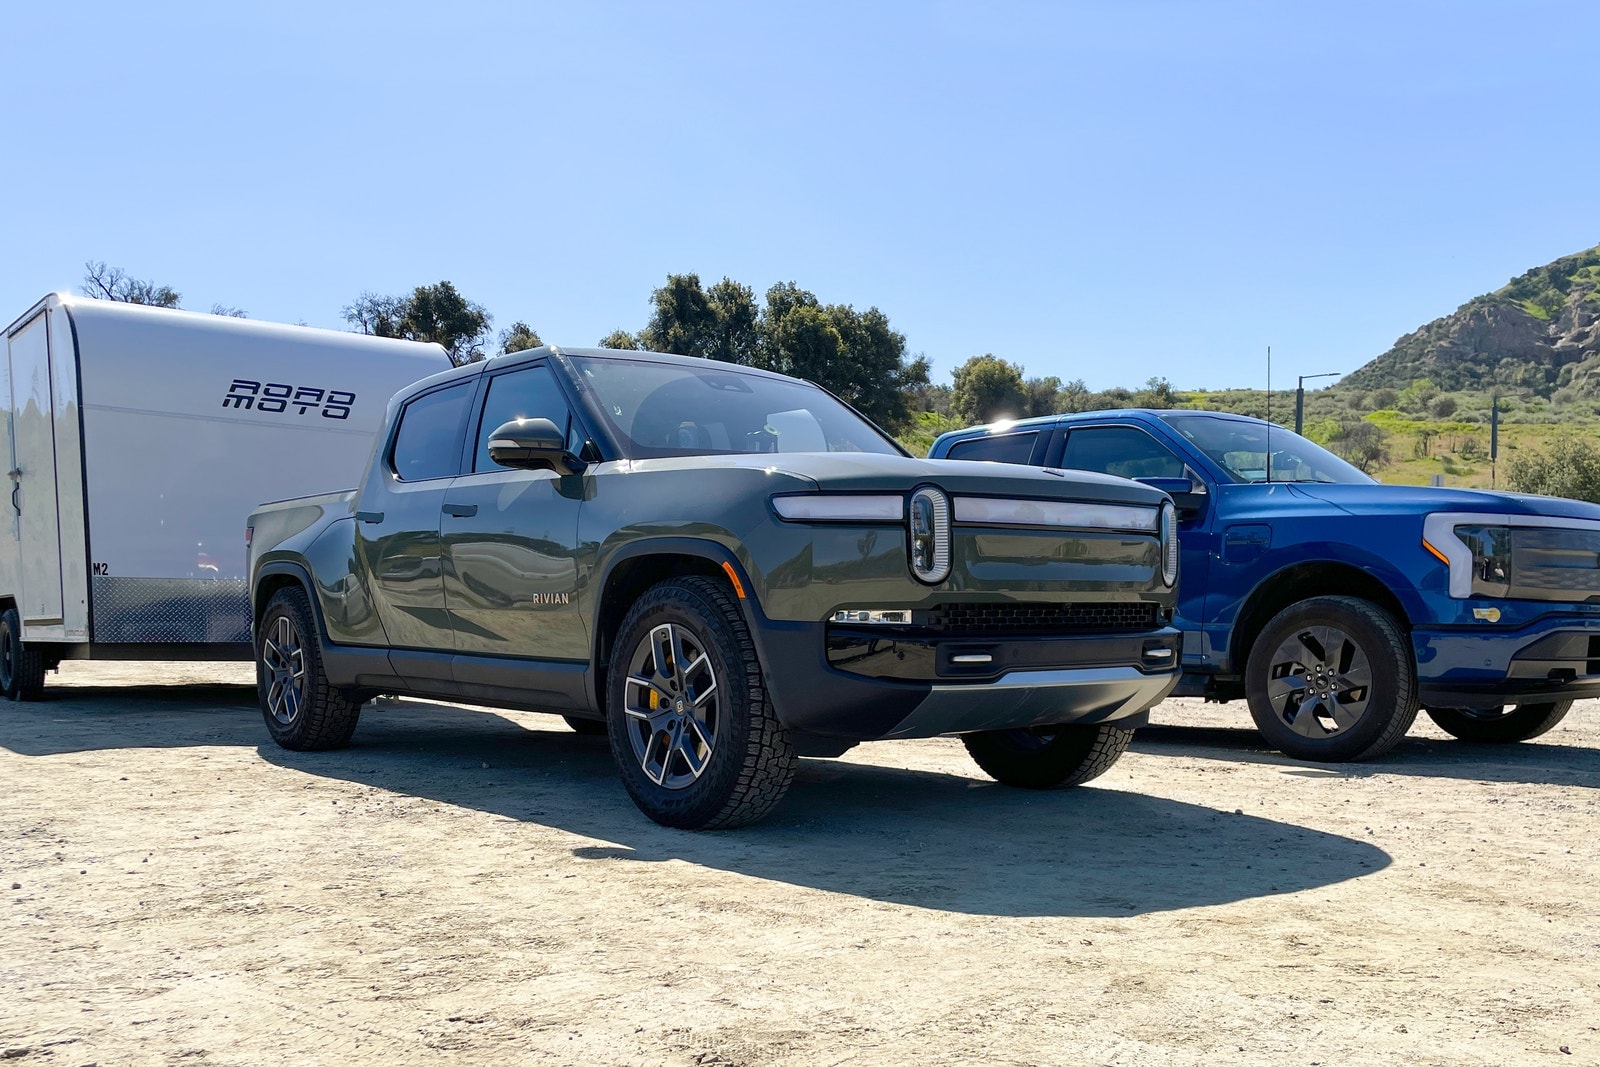 Rivian R1T and Ford F-150 Lightning parked side by side